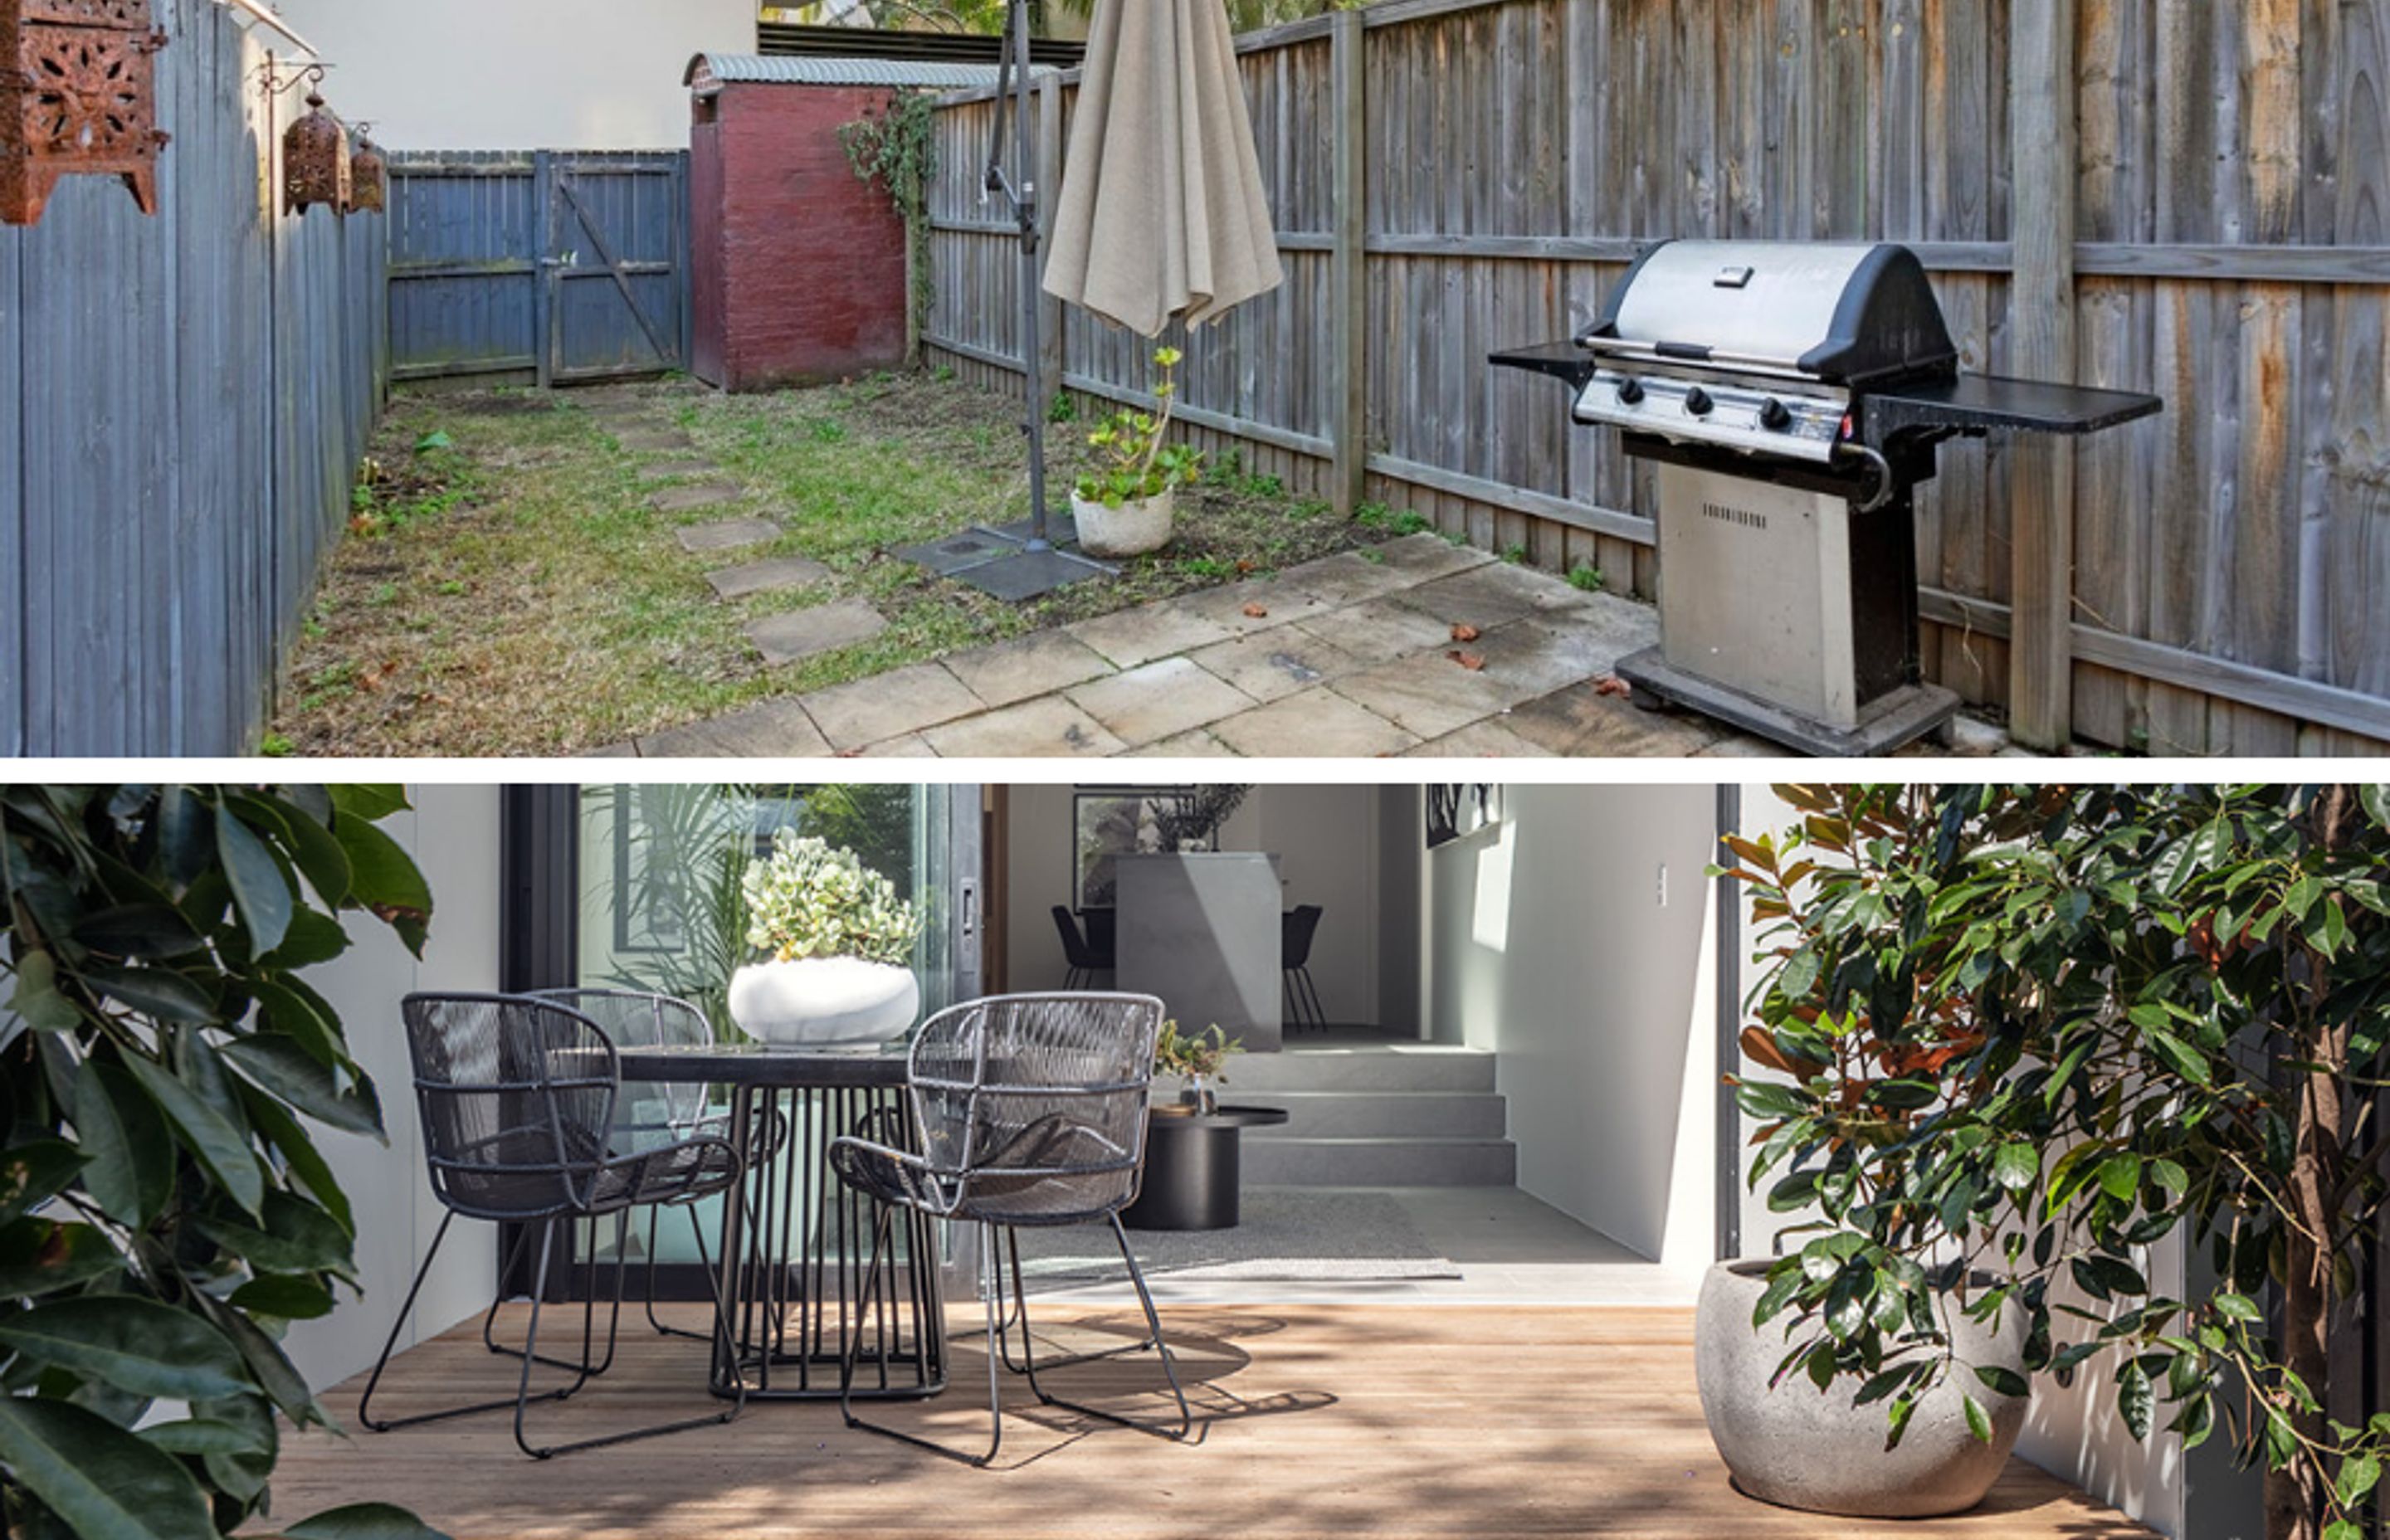 The backyard of the home has a whole new look. After image: Murray Fredericks